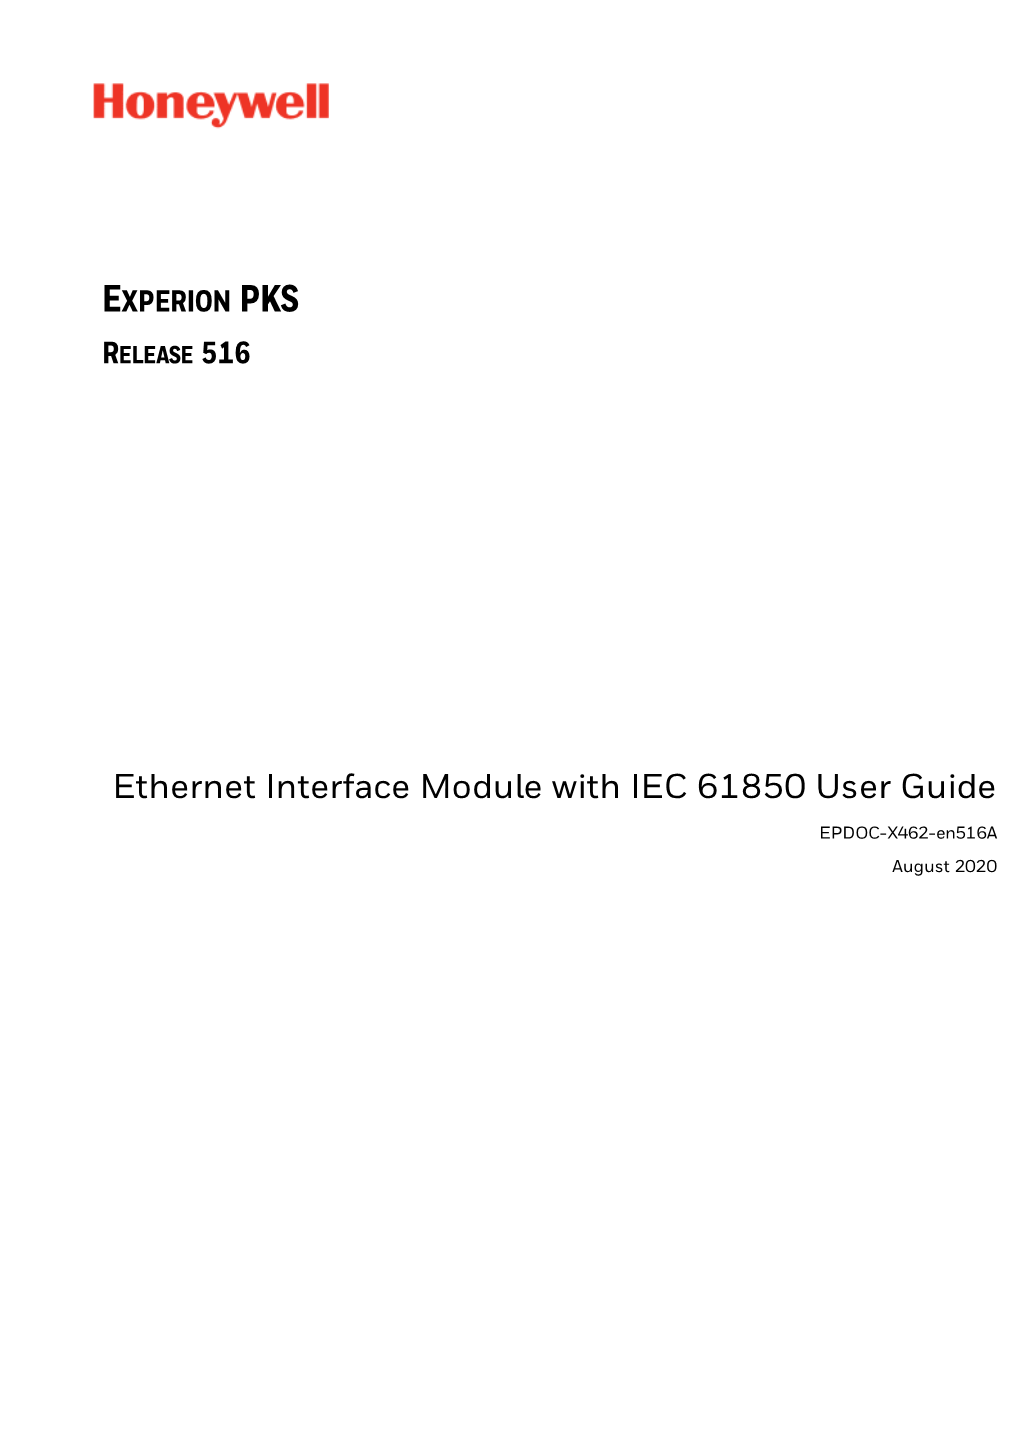 Ethernet Interface Module with IEC 61850 User Guide